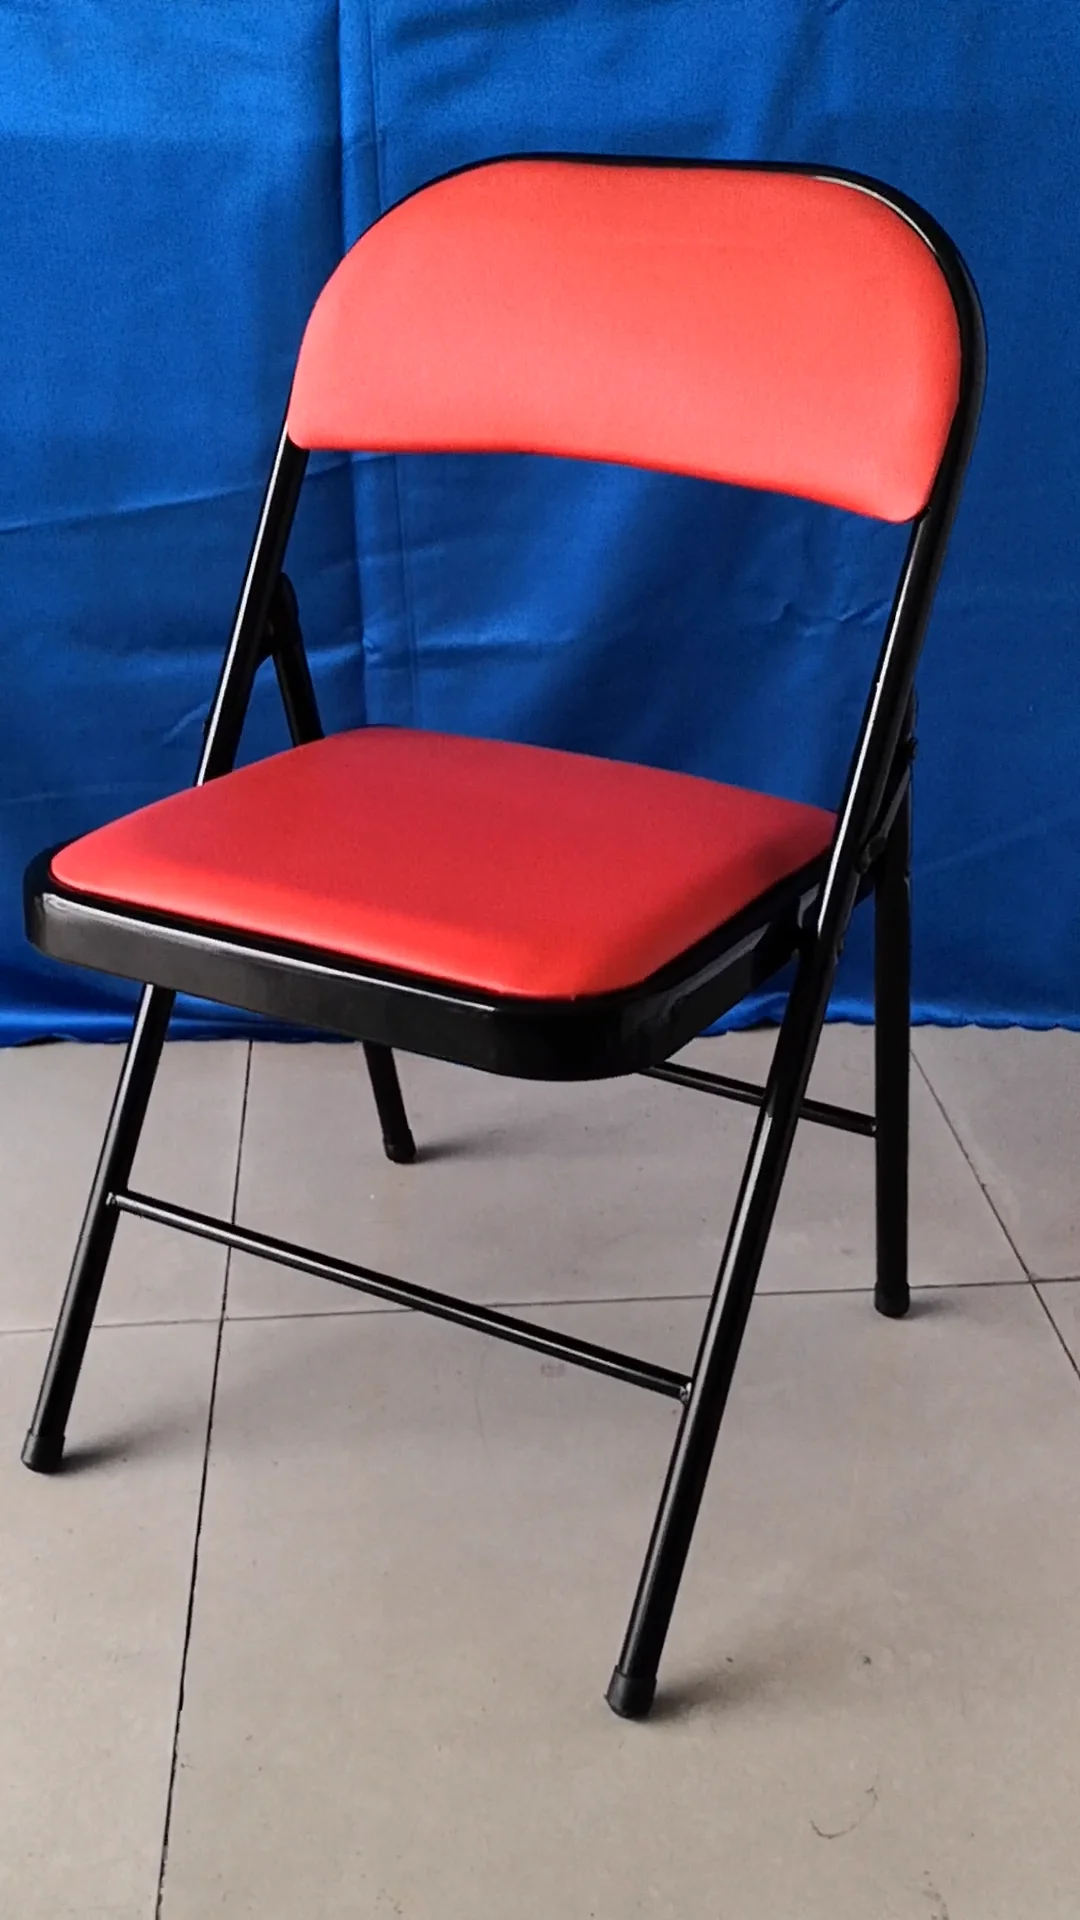 Wholesale Outdoor Foldable Restaurant Folding Chairs - Buy Wholesale